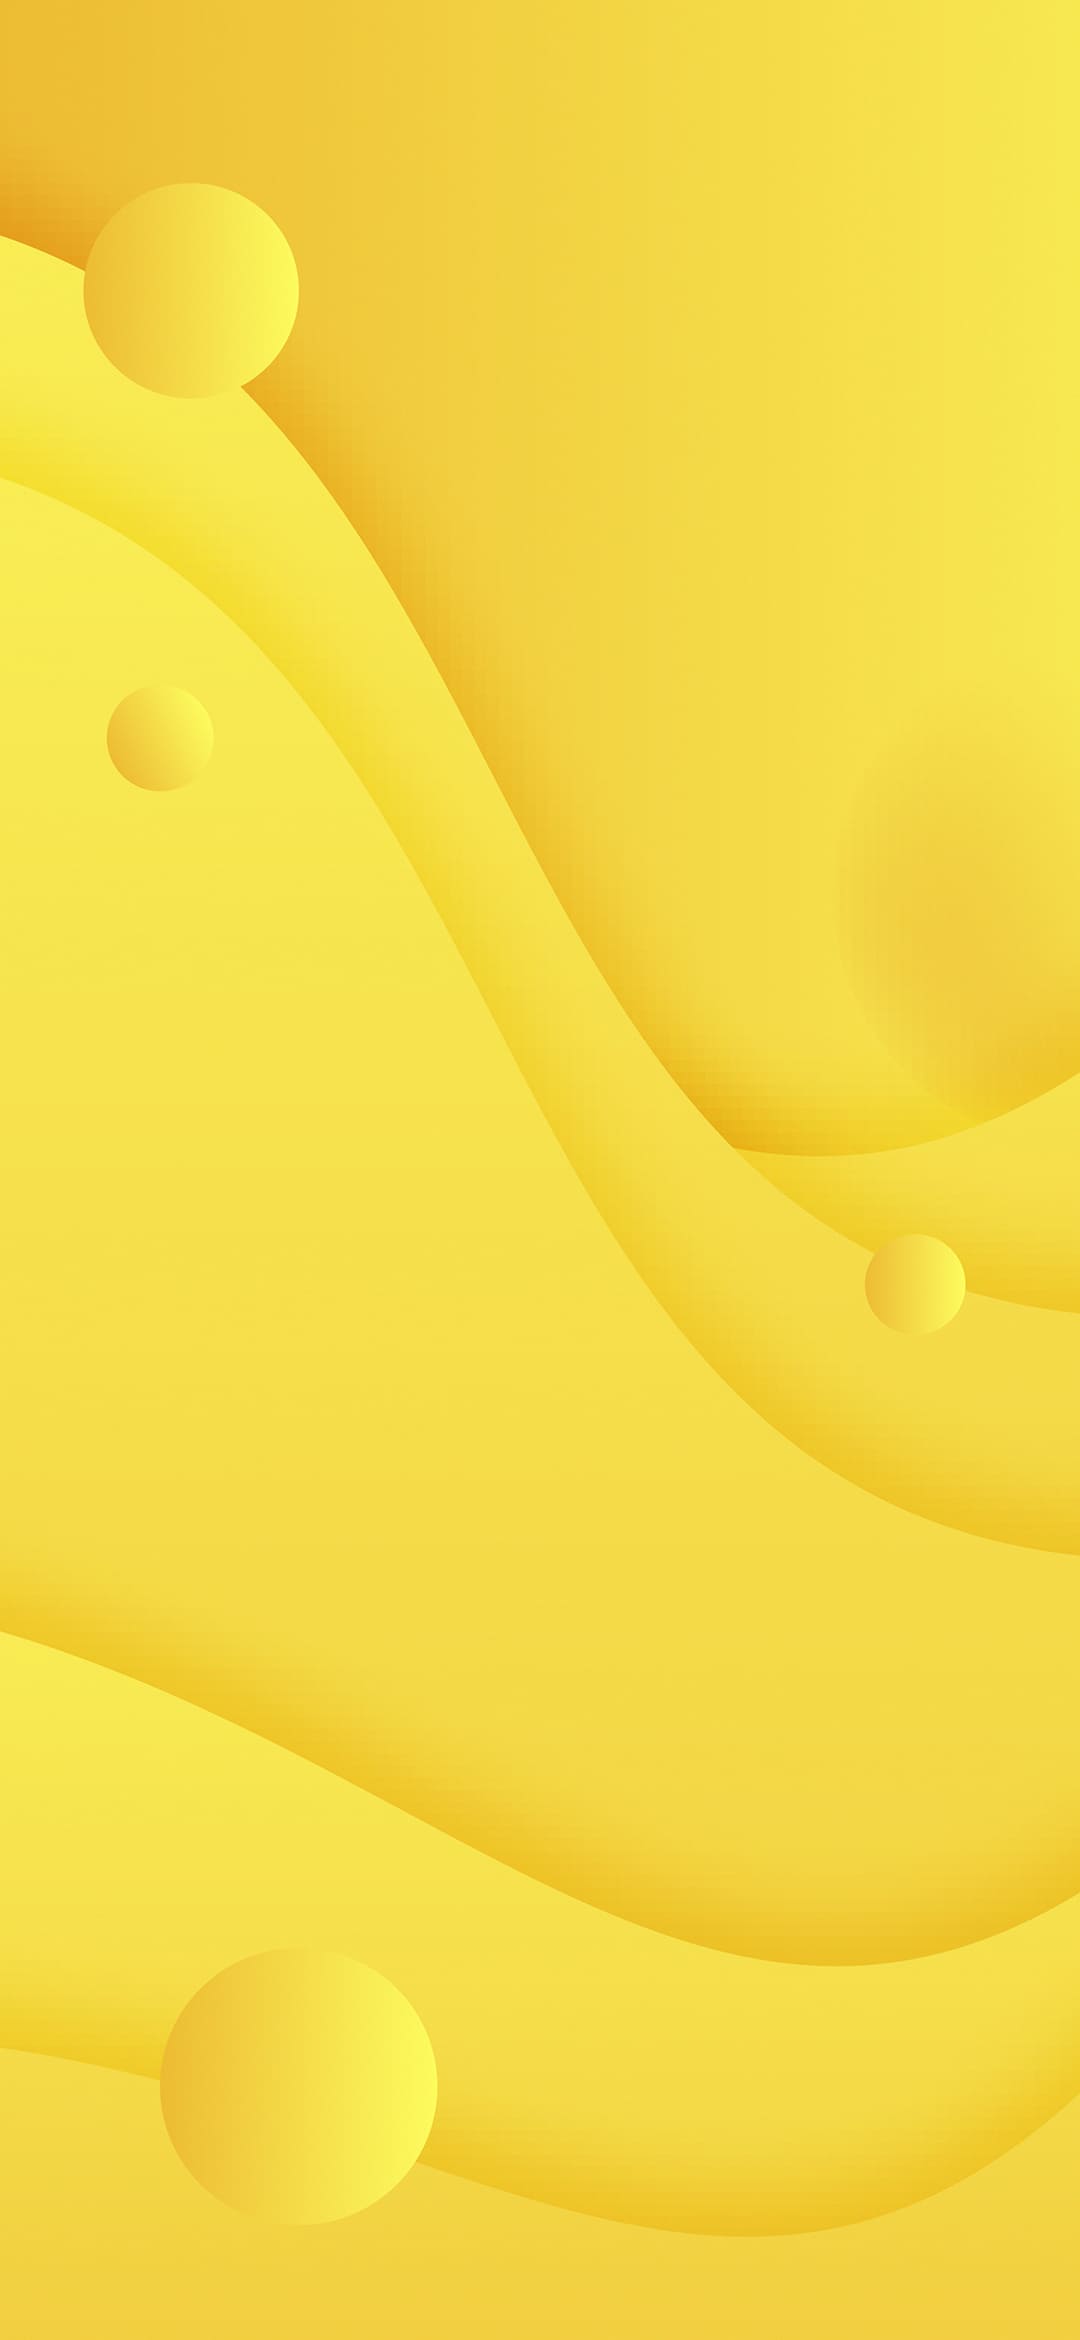 51 Yellow Aesthetic Wallpaper Options For iPhone  IdeasToKnow